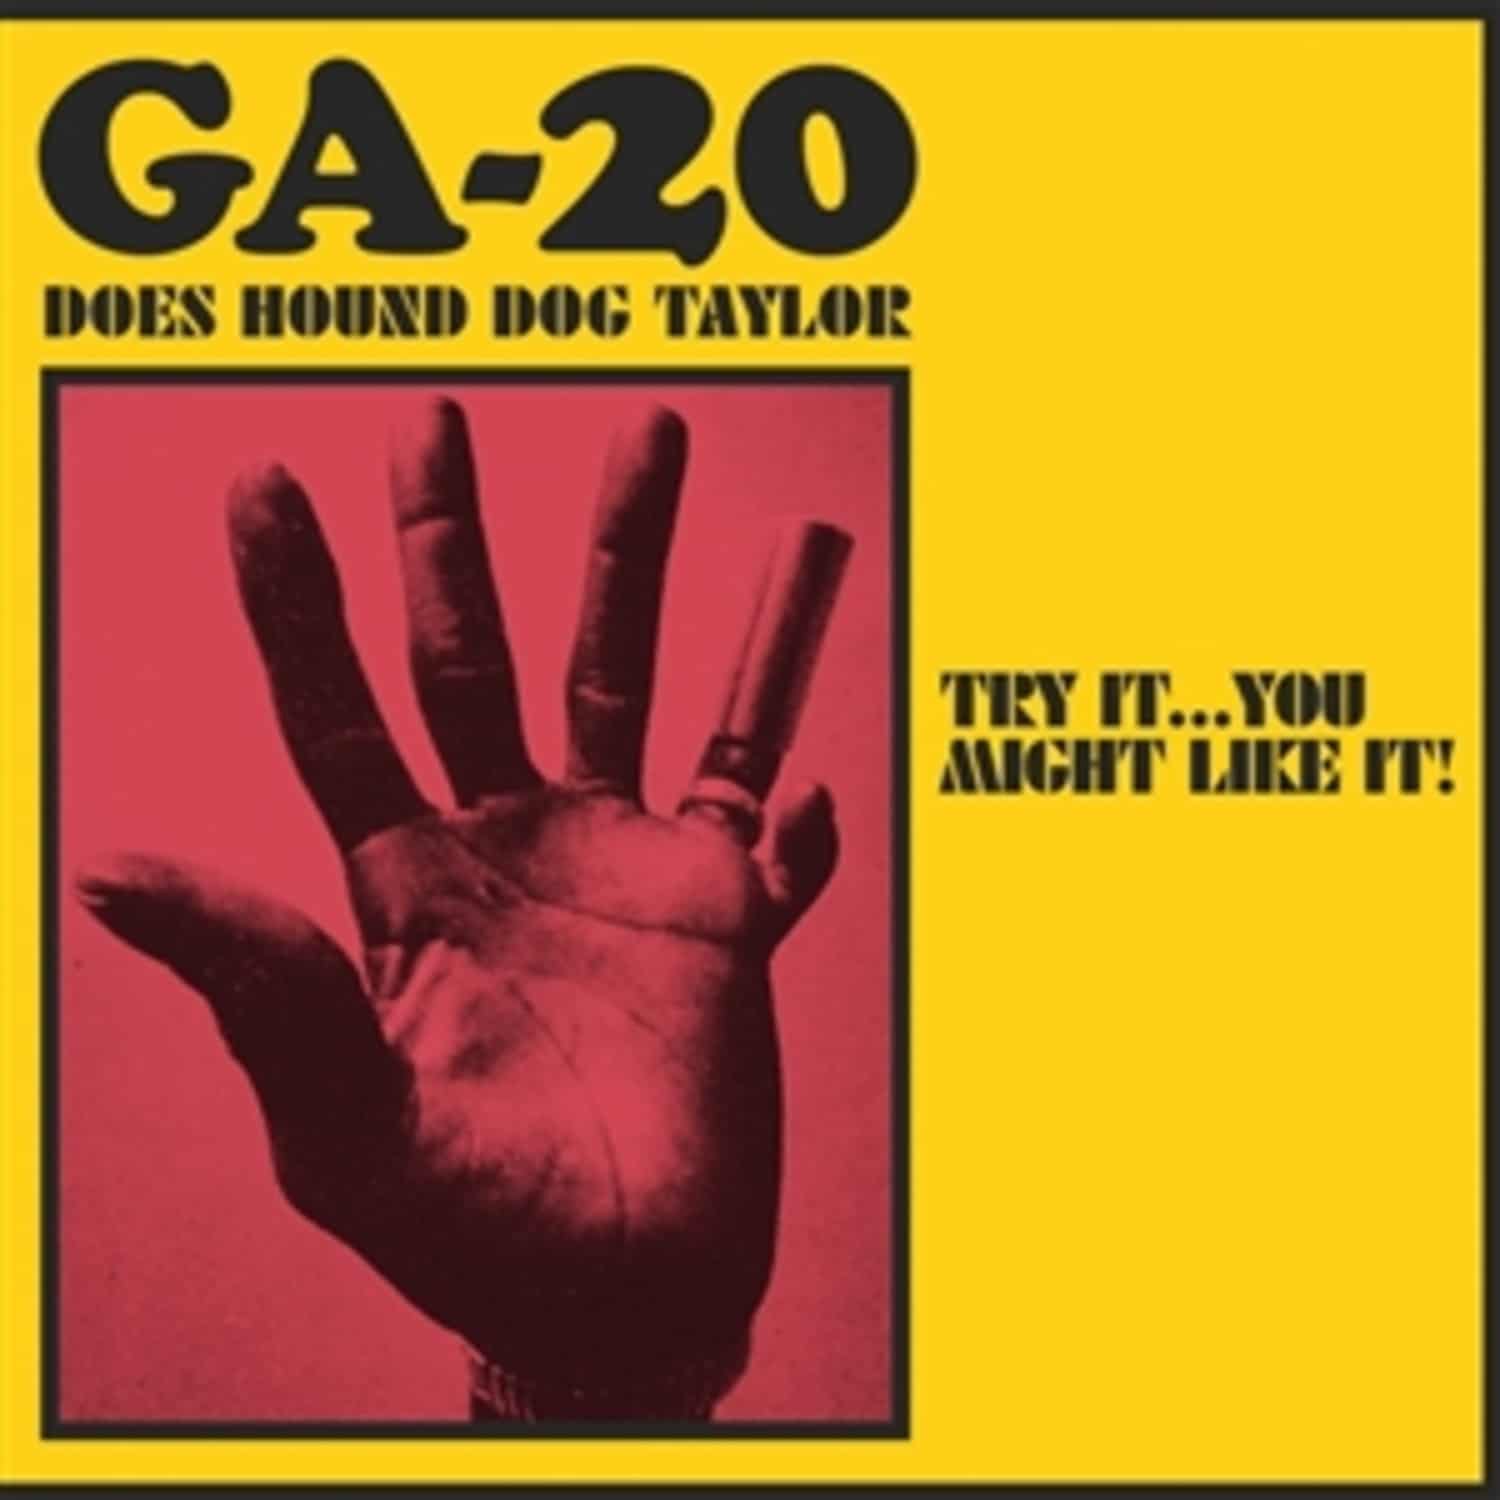 GA-20 - TRY IT... YOU MIGHT LIKE IT: GA-20 DOES HOUND DOG TAYLOR 